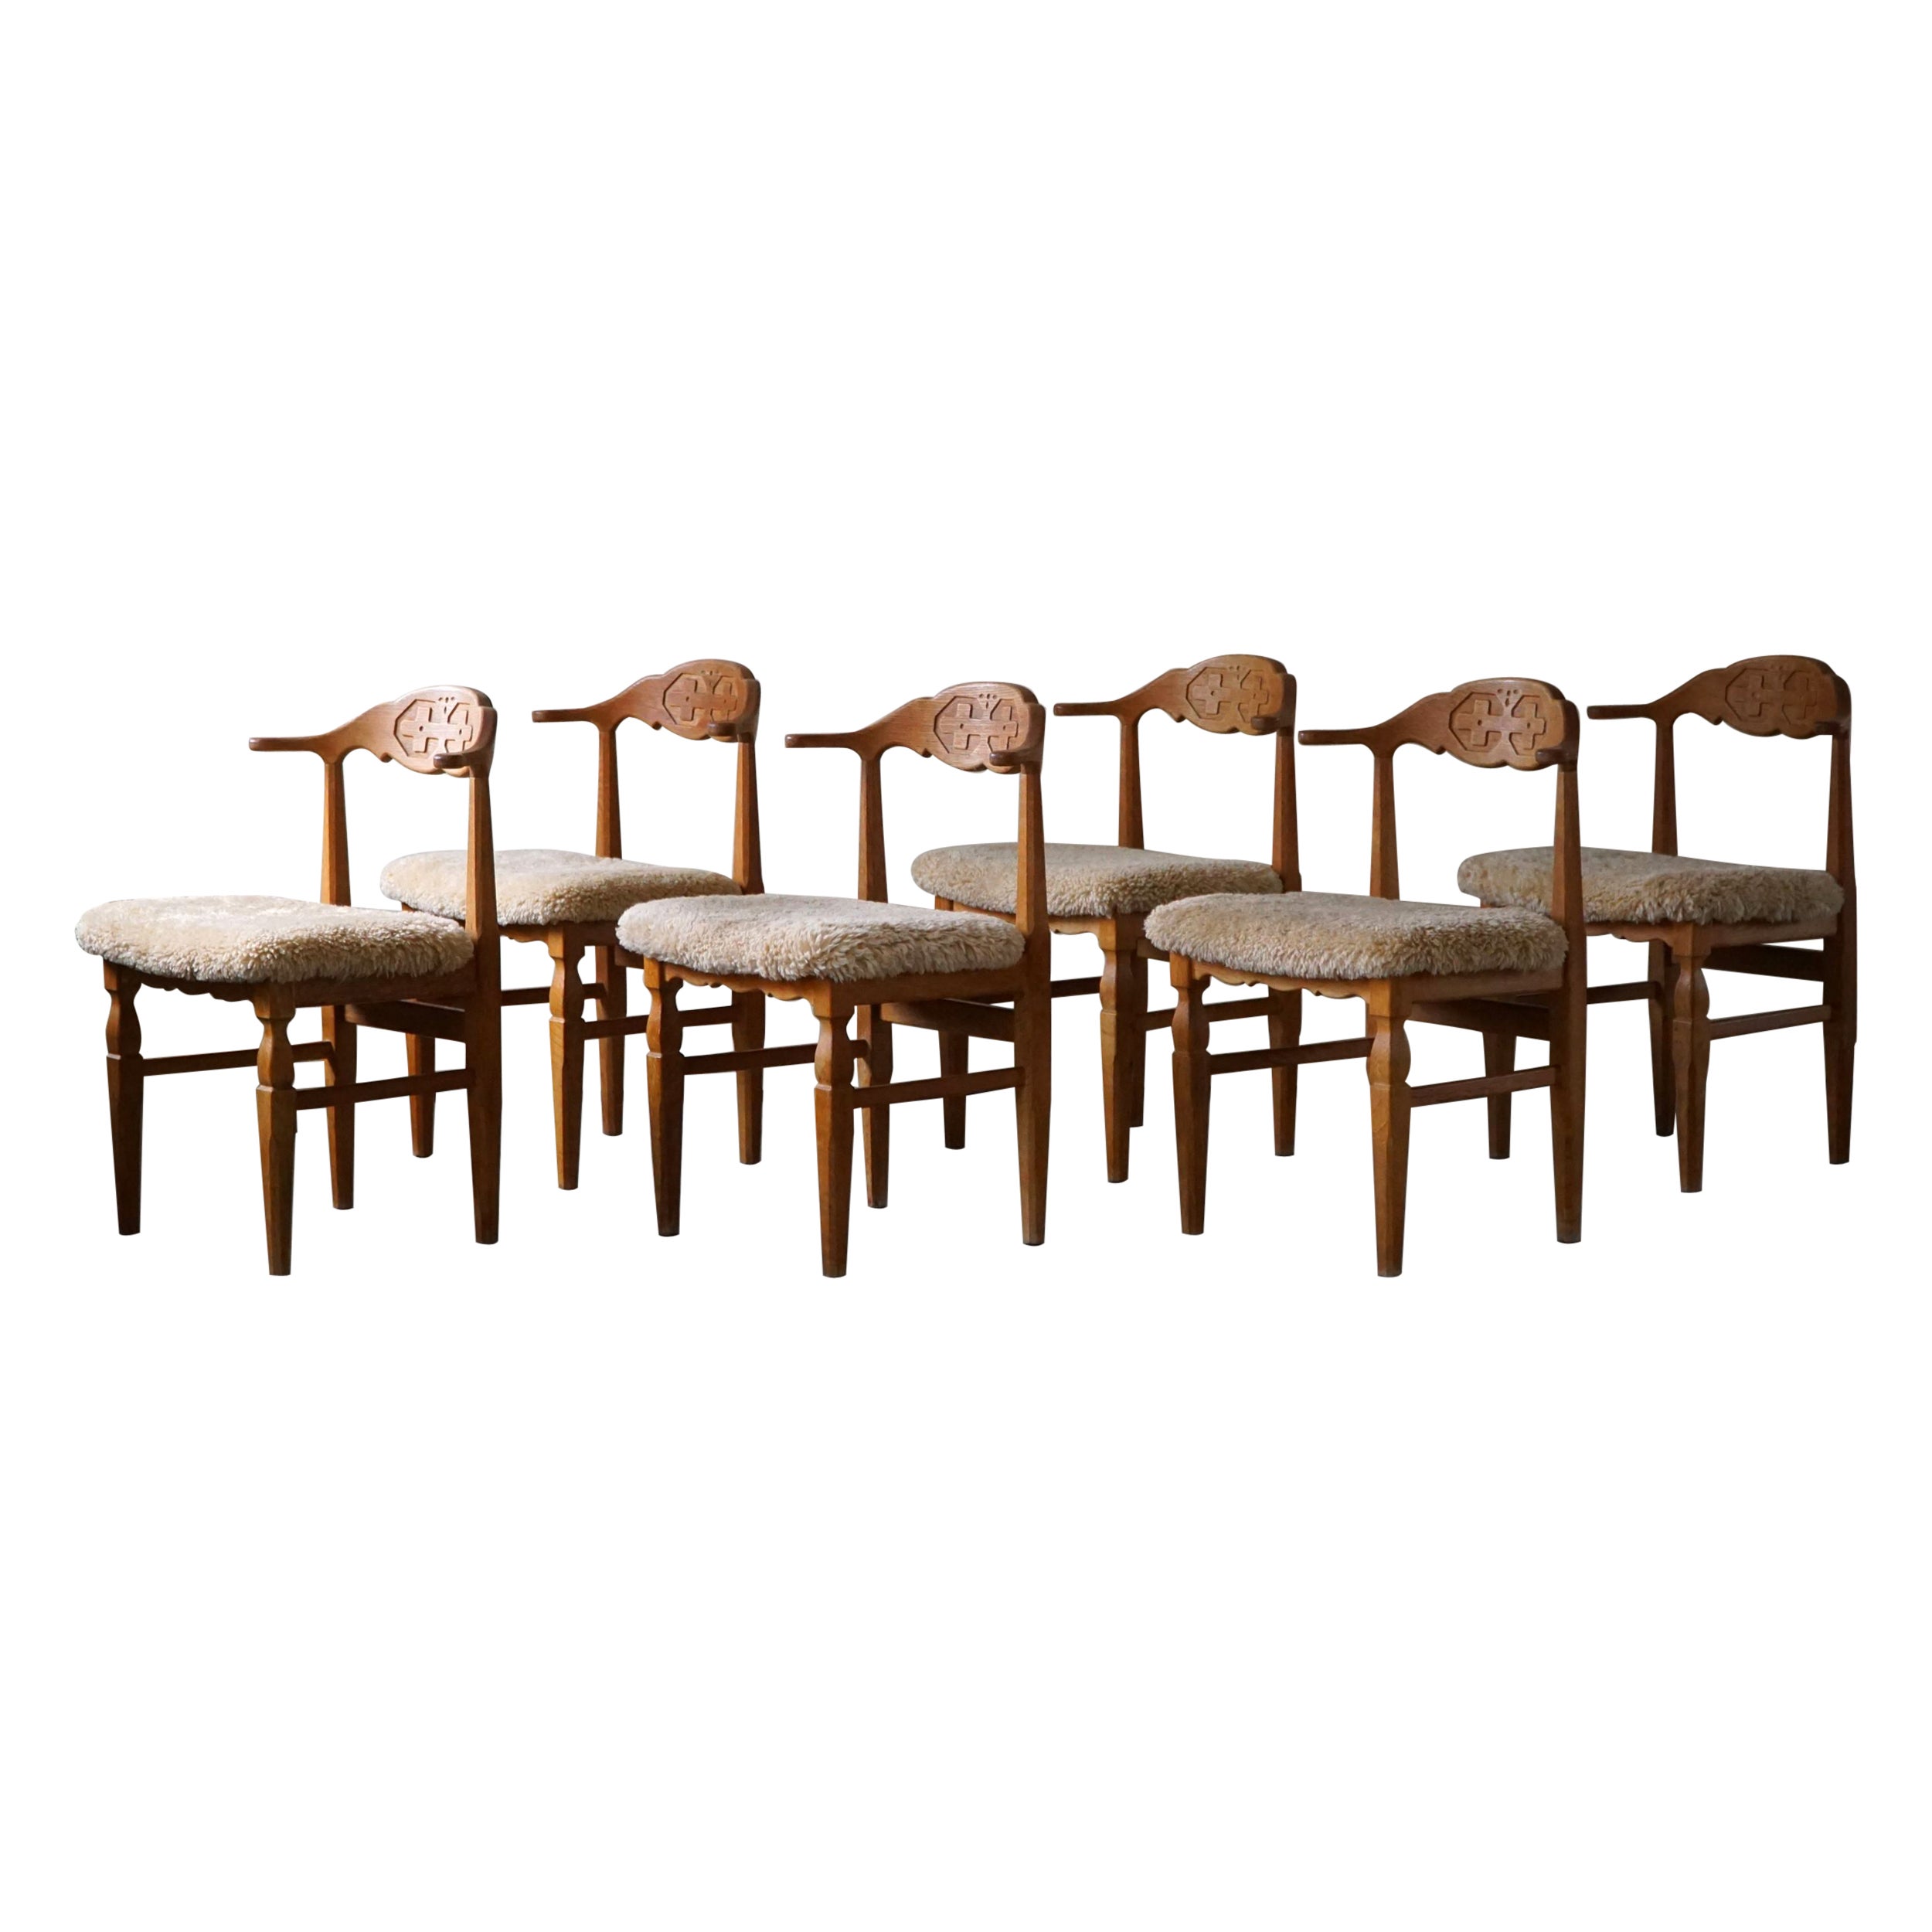 Henning Kjærnulf, Set of 6 Dining Chairs, Reupholstered in Lambswool, 1960s